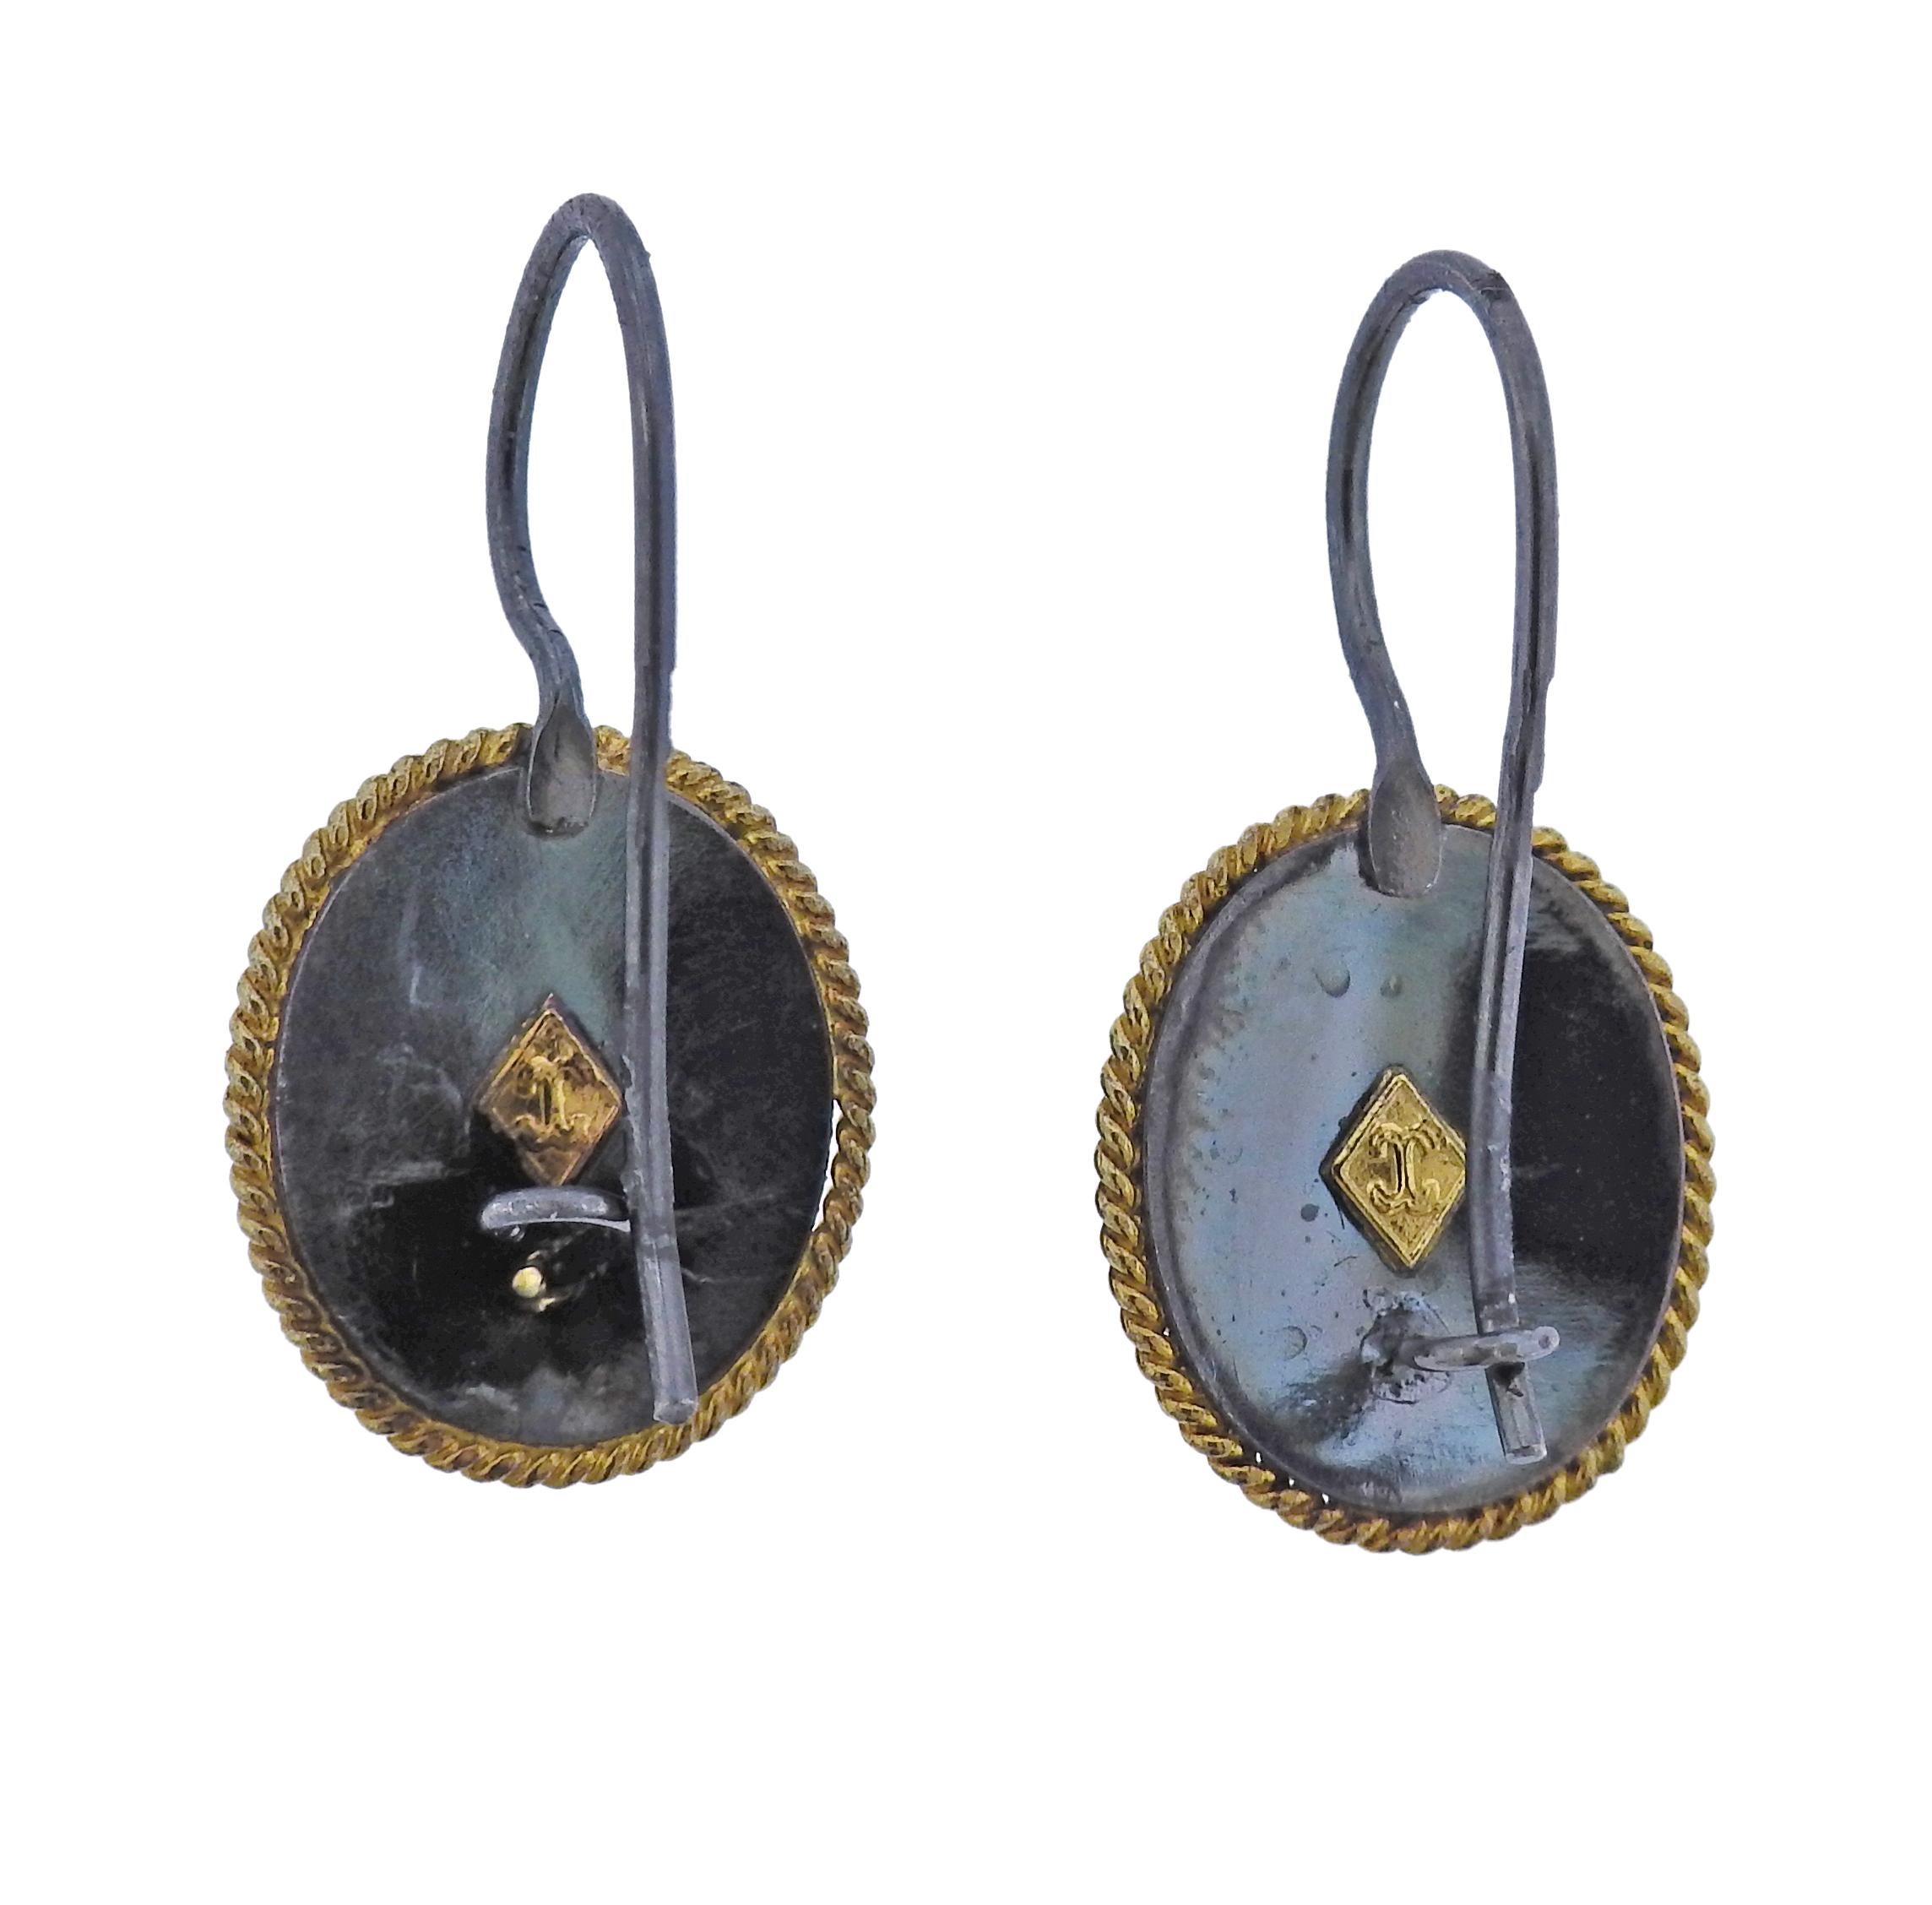 The jewelry offered by Castellani today, is created by the same gold techniques as in the 1850’s as well as by the ancient Etruscans. Pair of 18k gold and silver filigree oval earrings by Castellani. Earrings are 29mm long, oval measures 17mm x